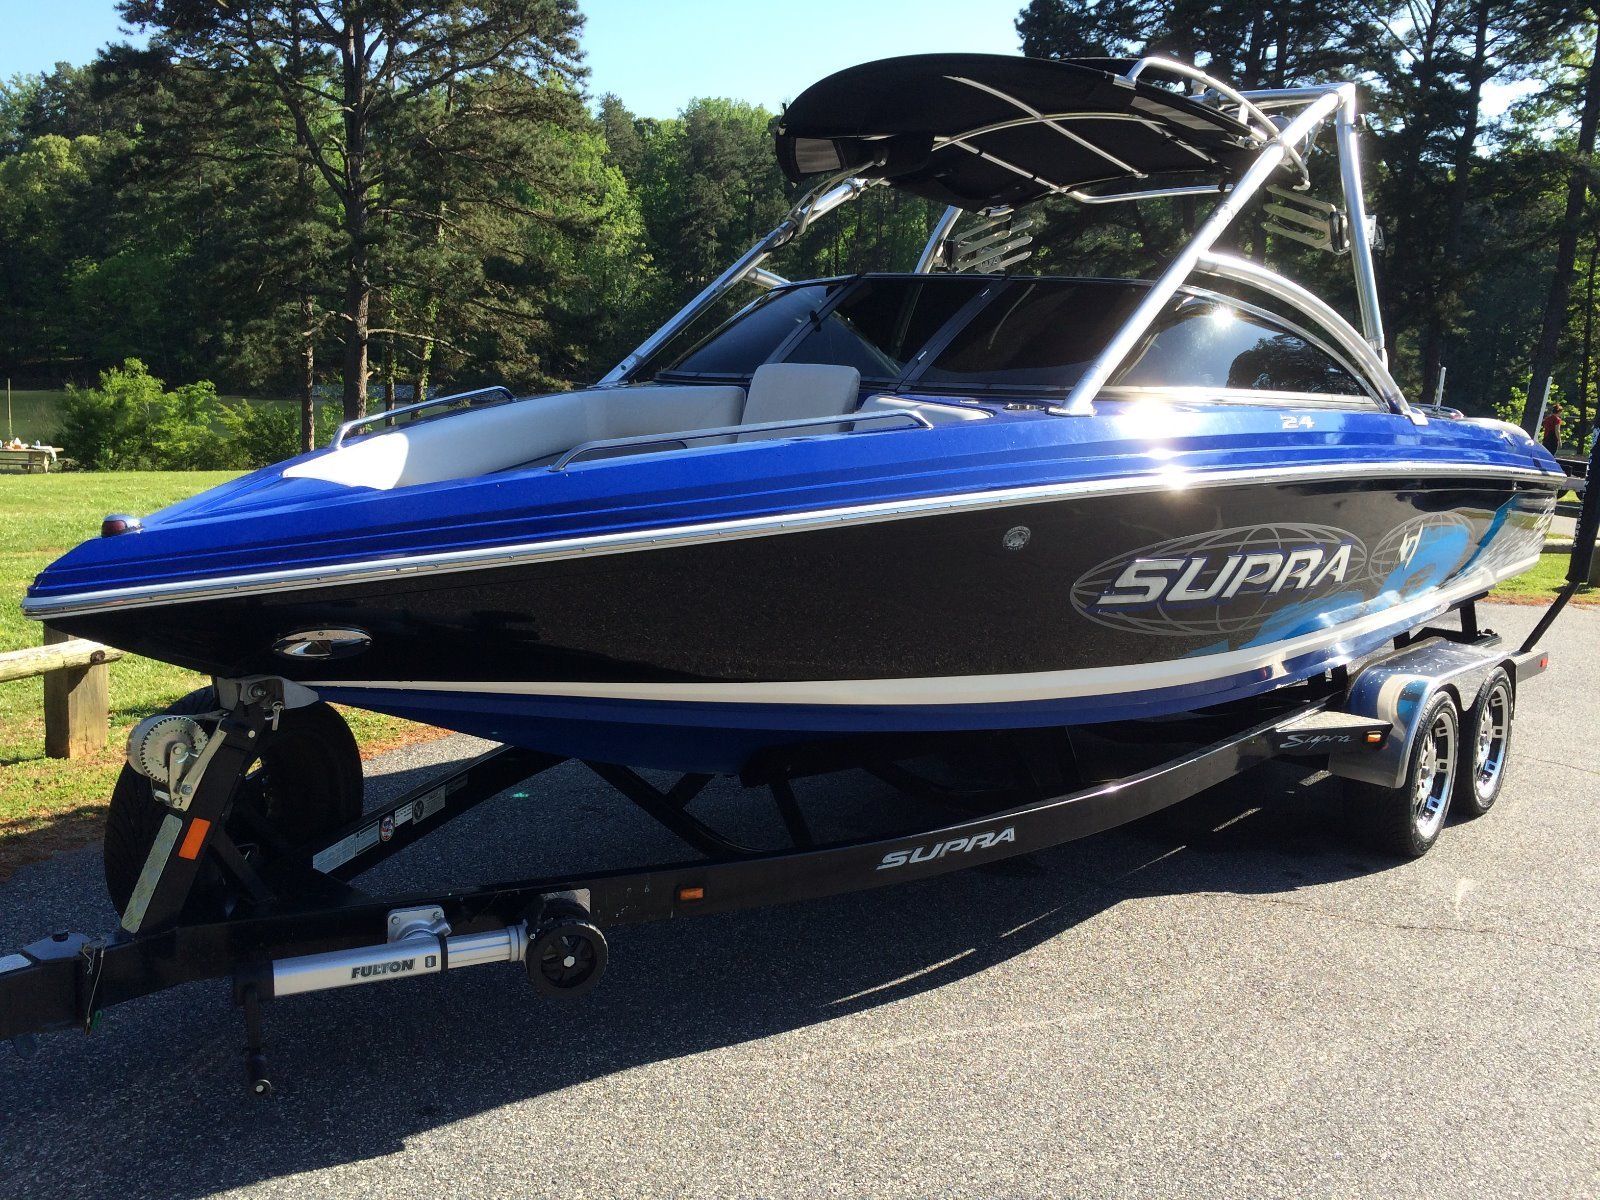 Supra 2008 for sale for $44,800 - Boats-from-USA.com